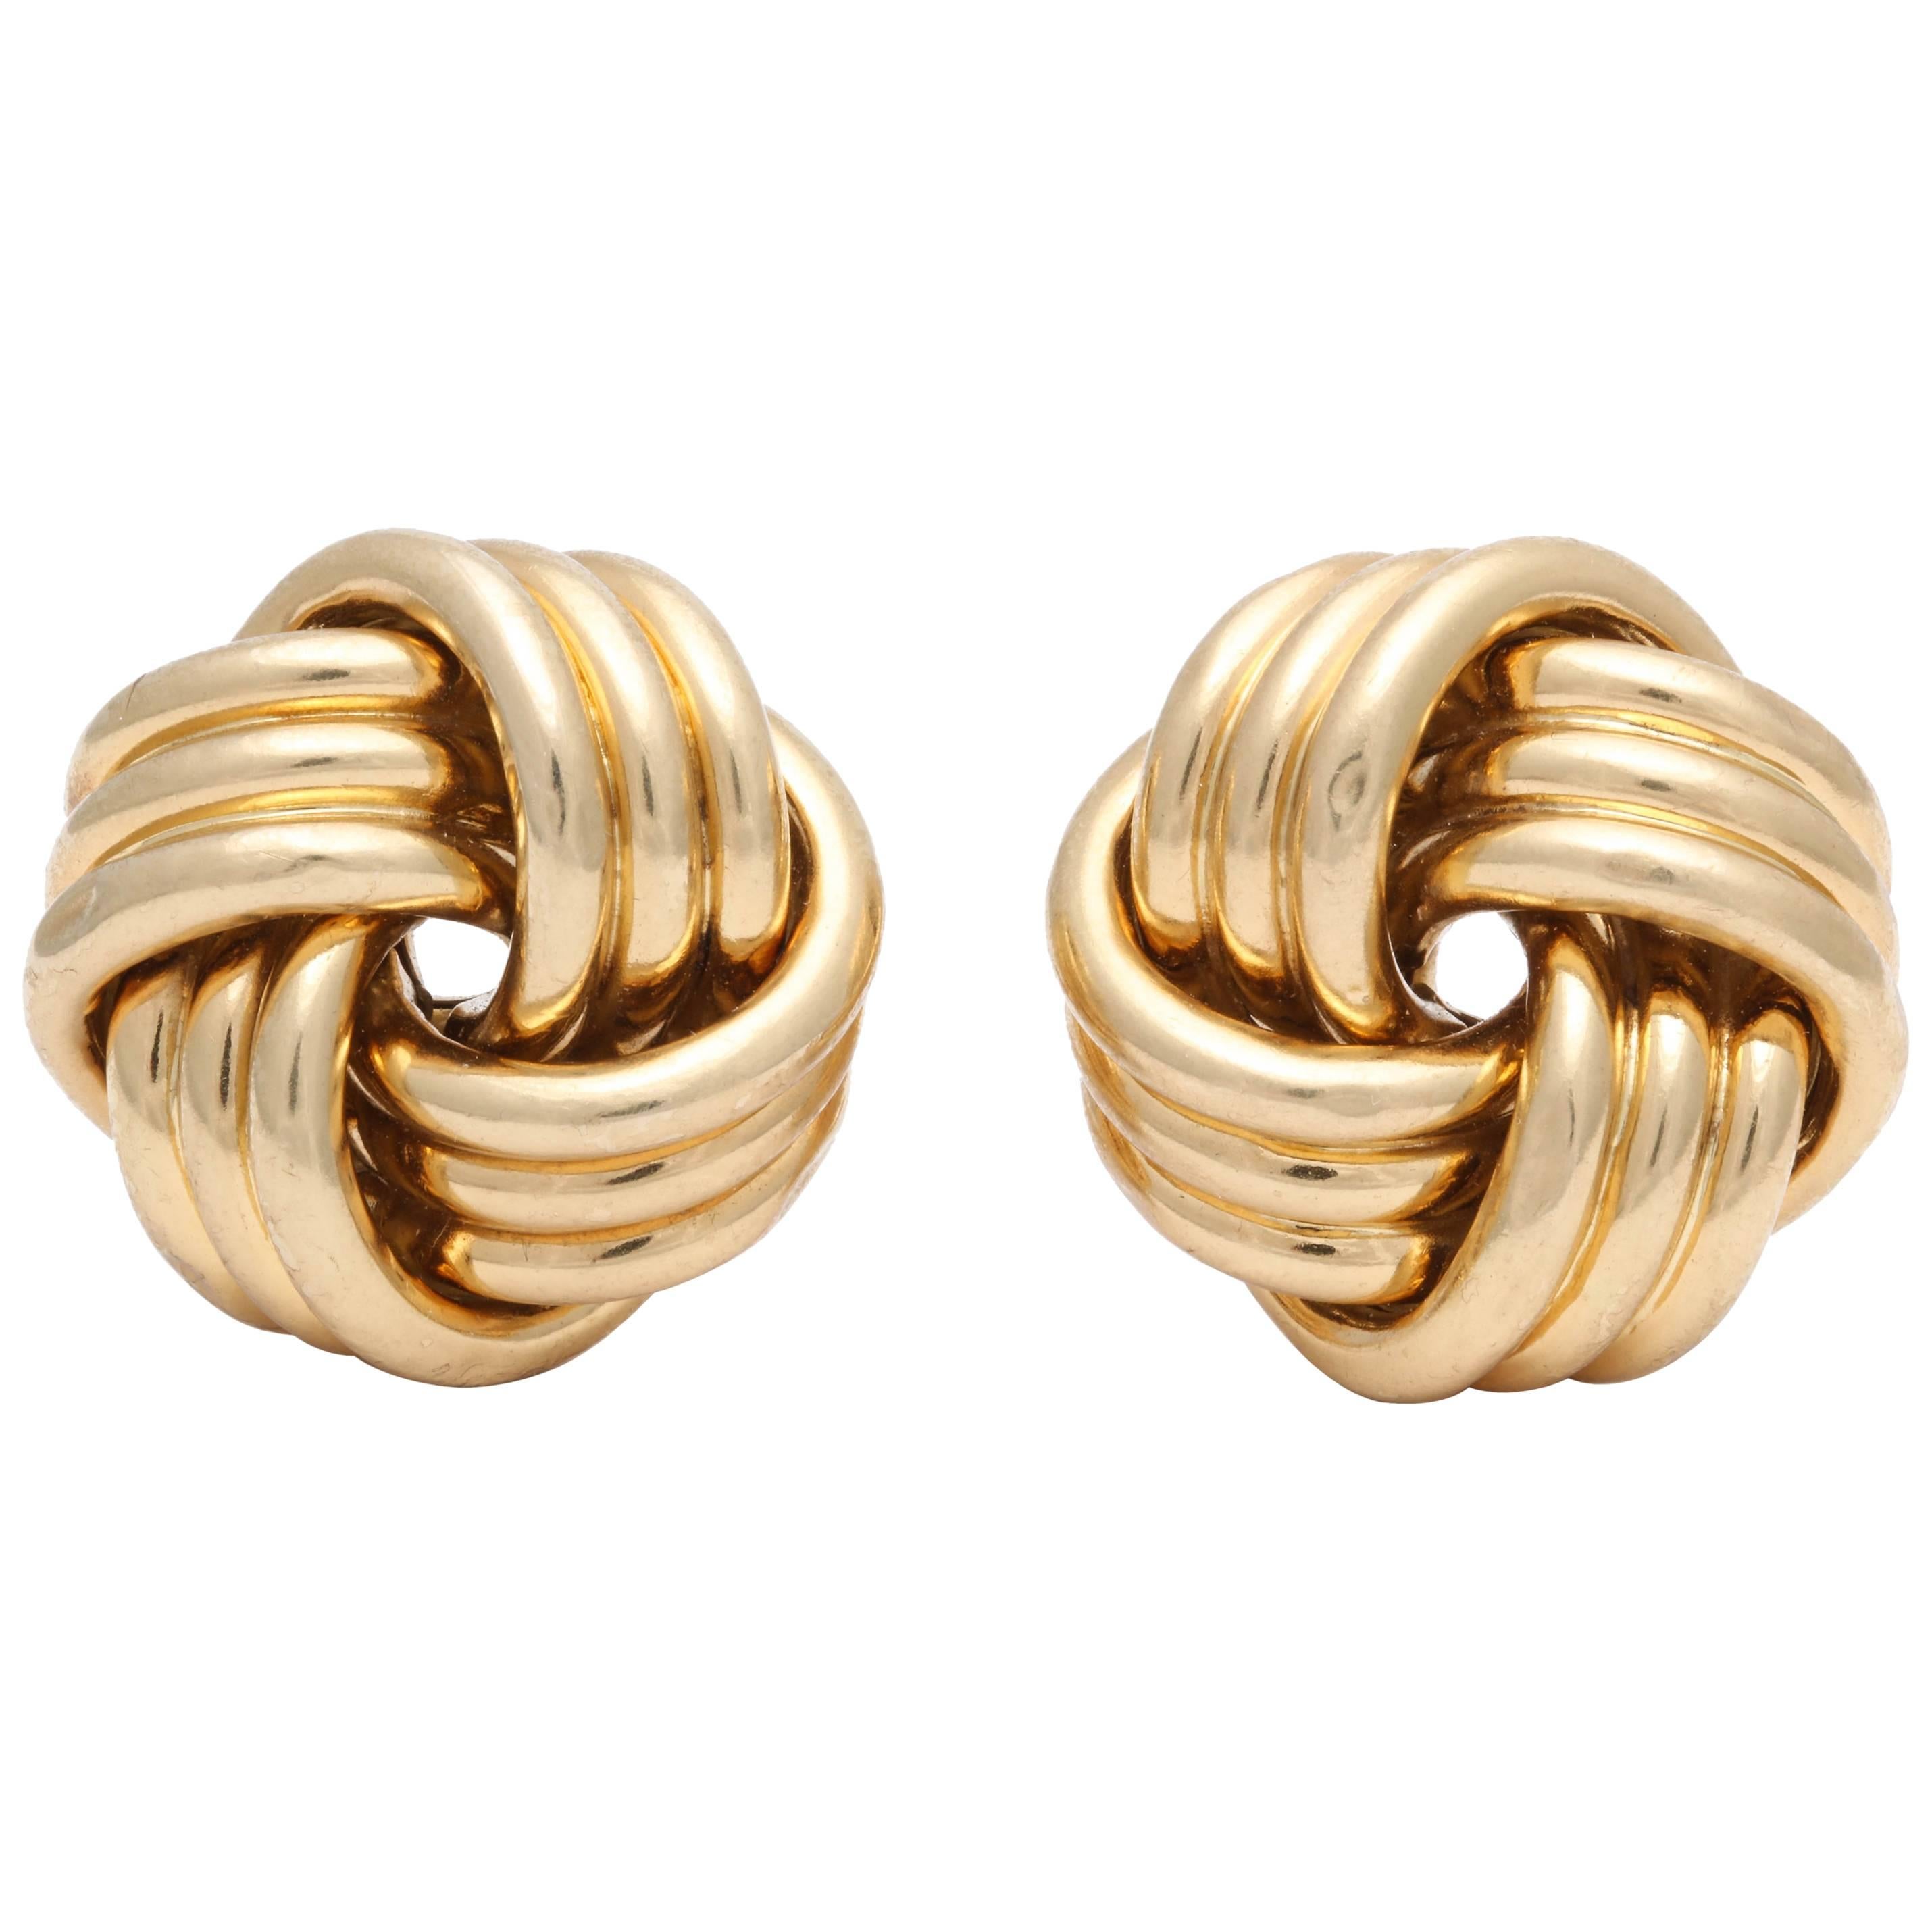 Abel and Zimmerman 1960s Jumbo Lover's Knot Twist Textured Gold Earrings